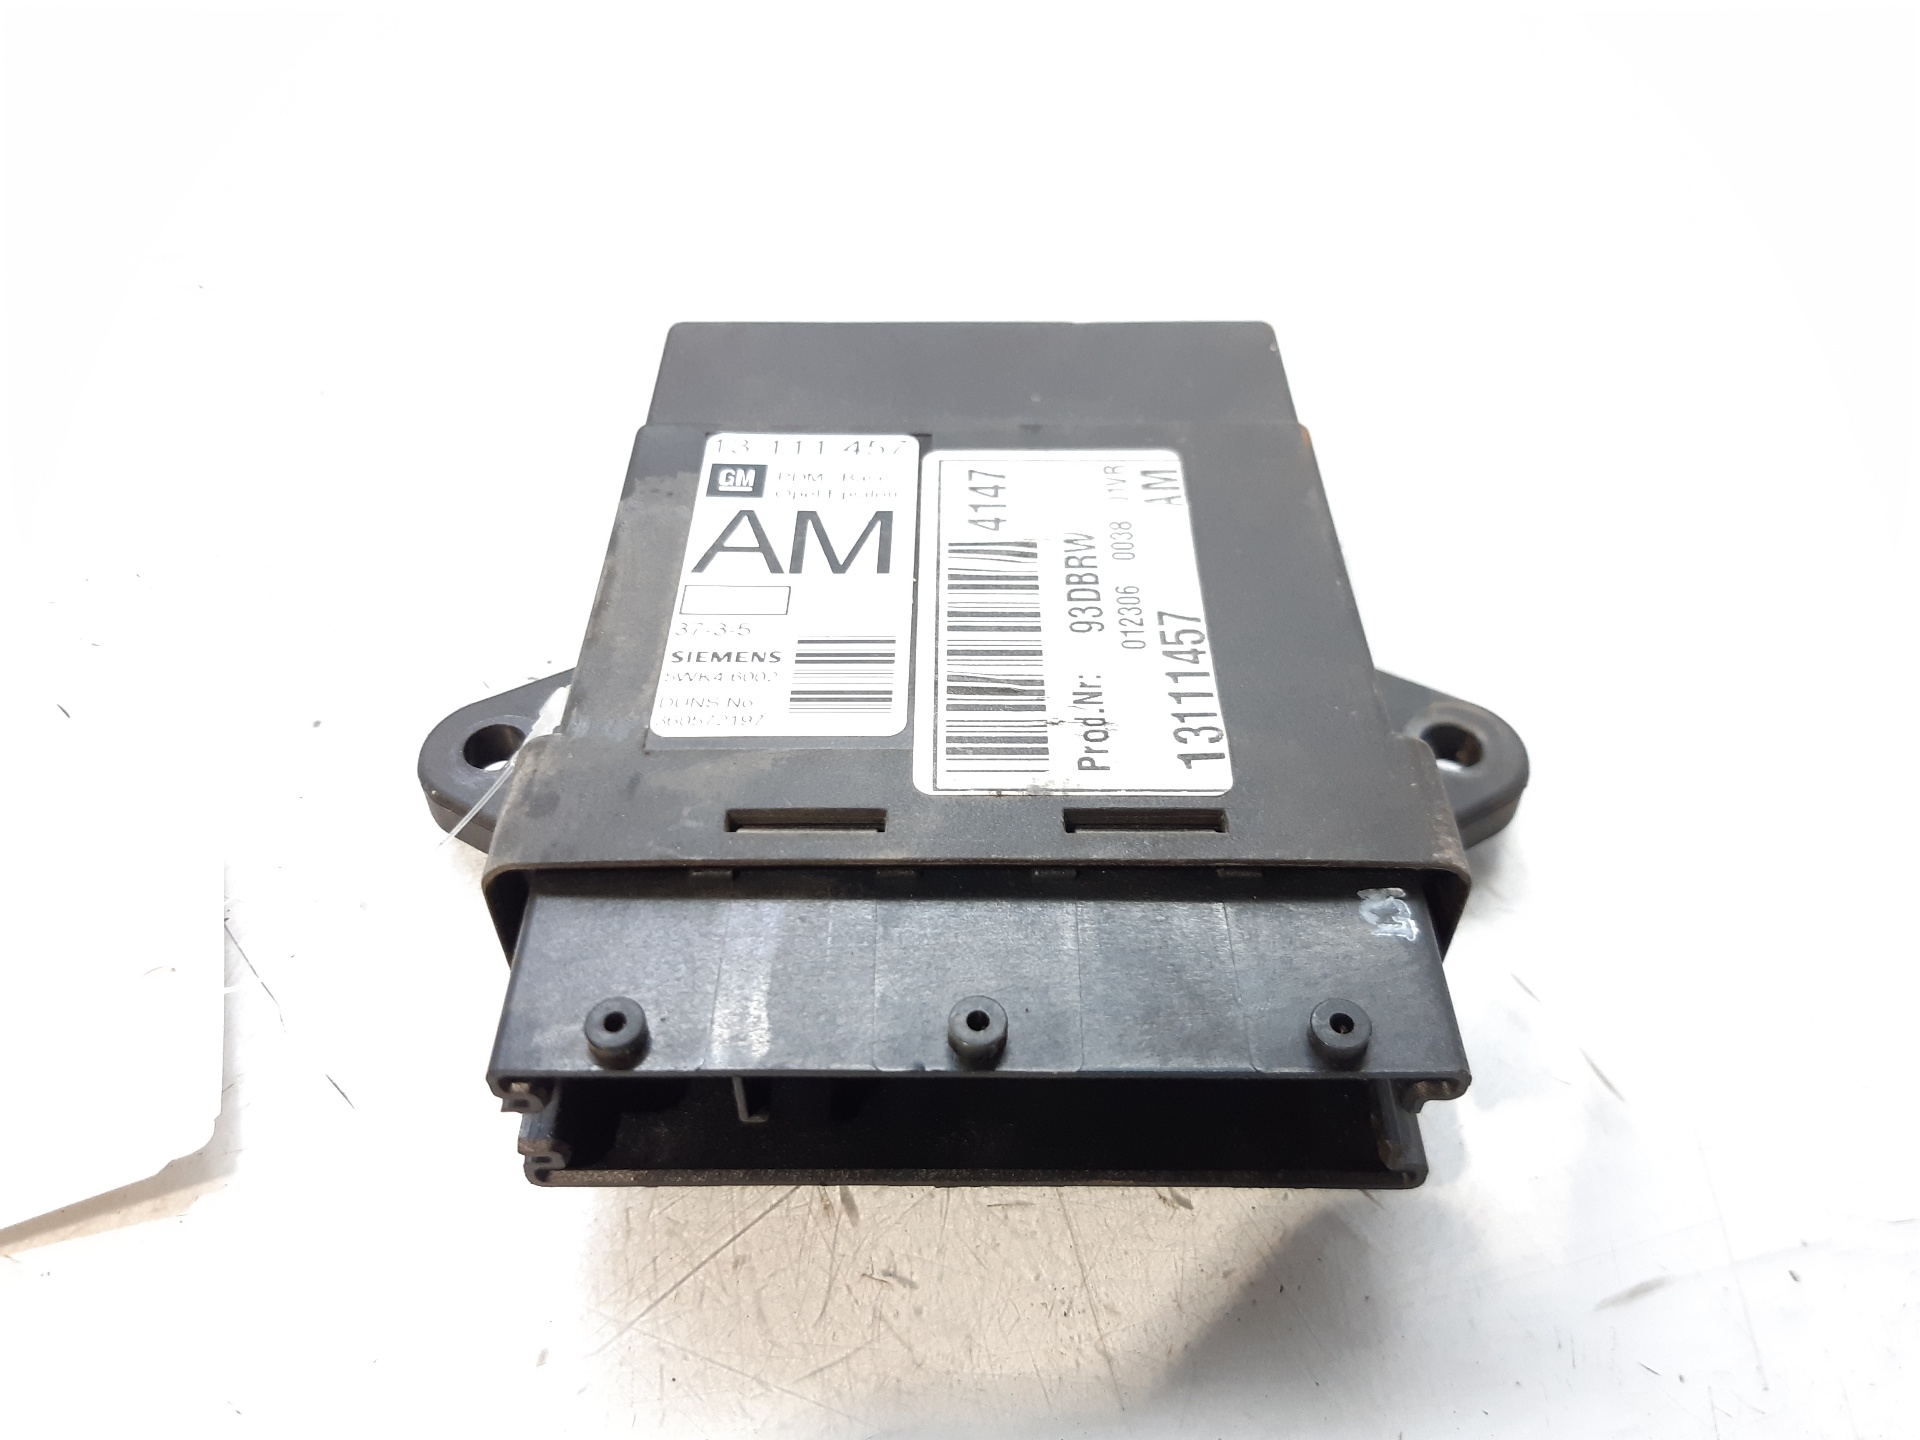 OPEL Vectra C (2002-2005) Other Control Units 13111457 18734958